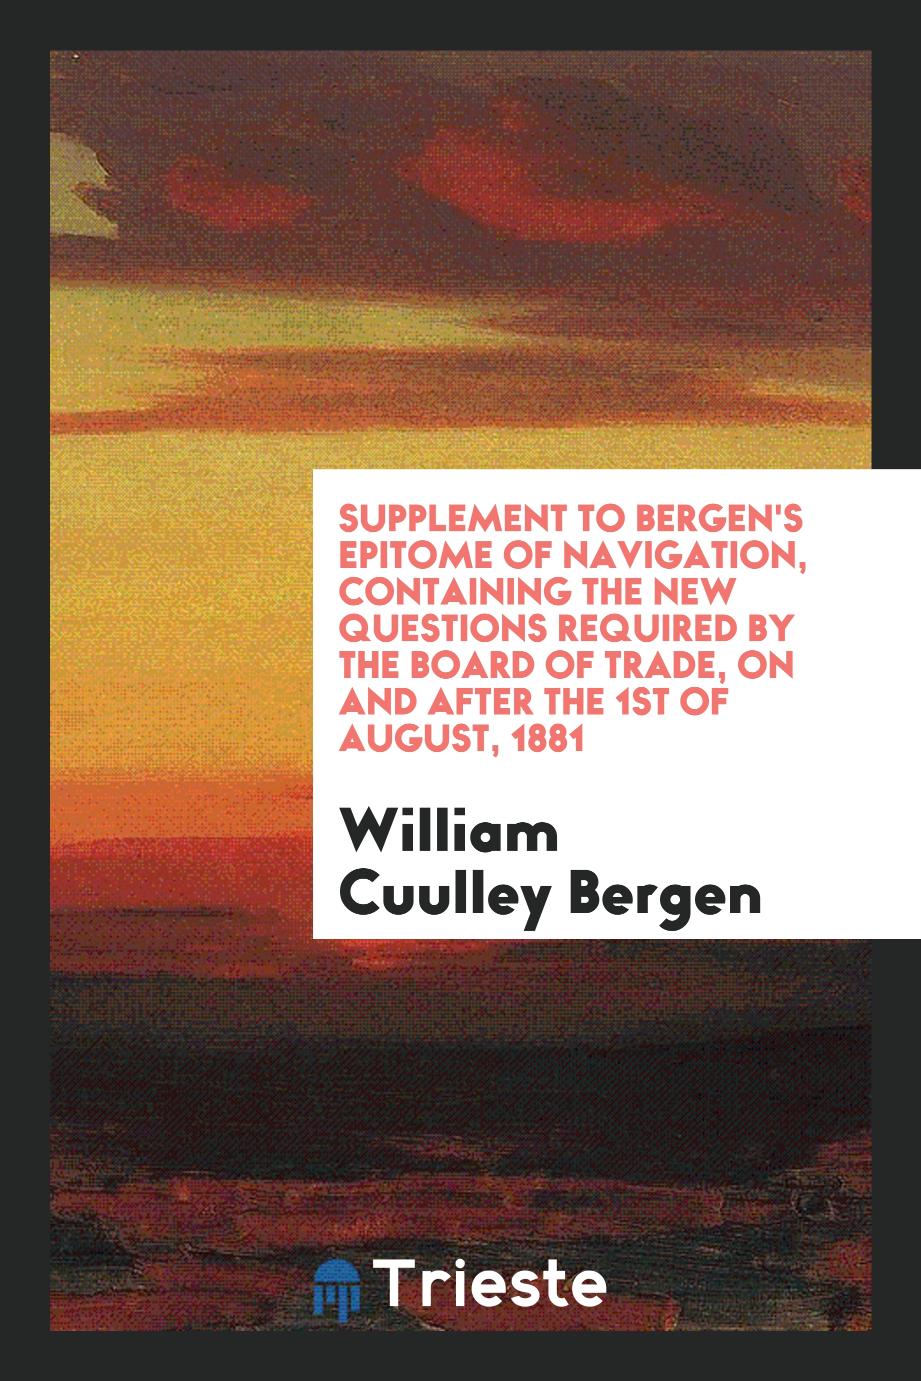 Supplement to Bergen's Epitome of Navigation, Containing the New Questions Required by the Board of Trade, on and After the 1st of August, 1881